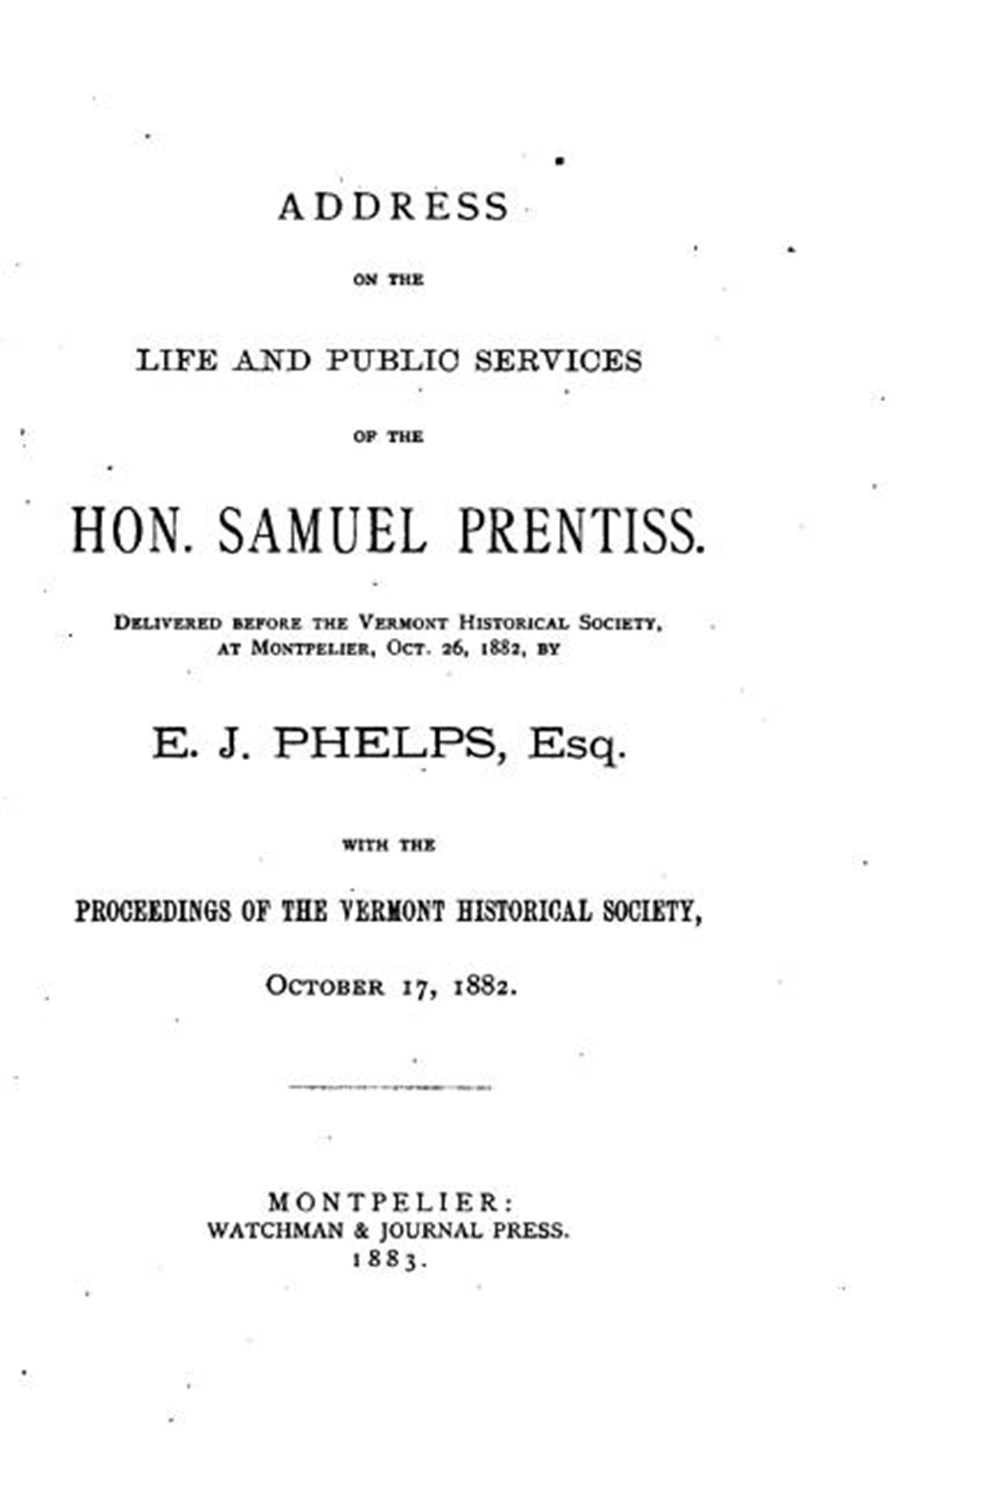 Address on the Life and Public Services of the Hon. Samuel Prentiss